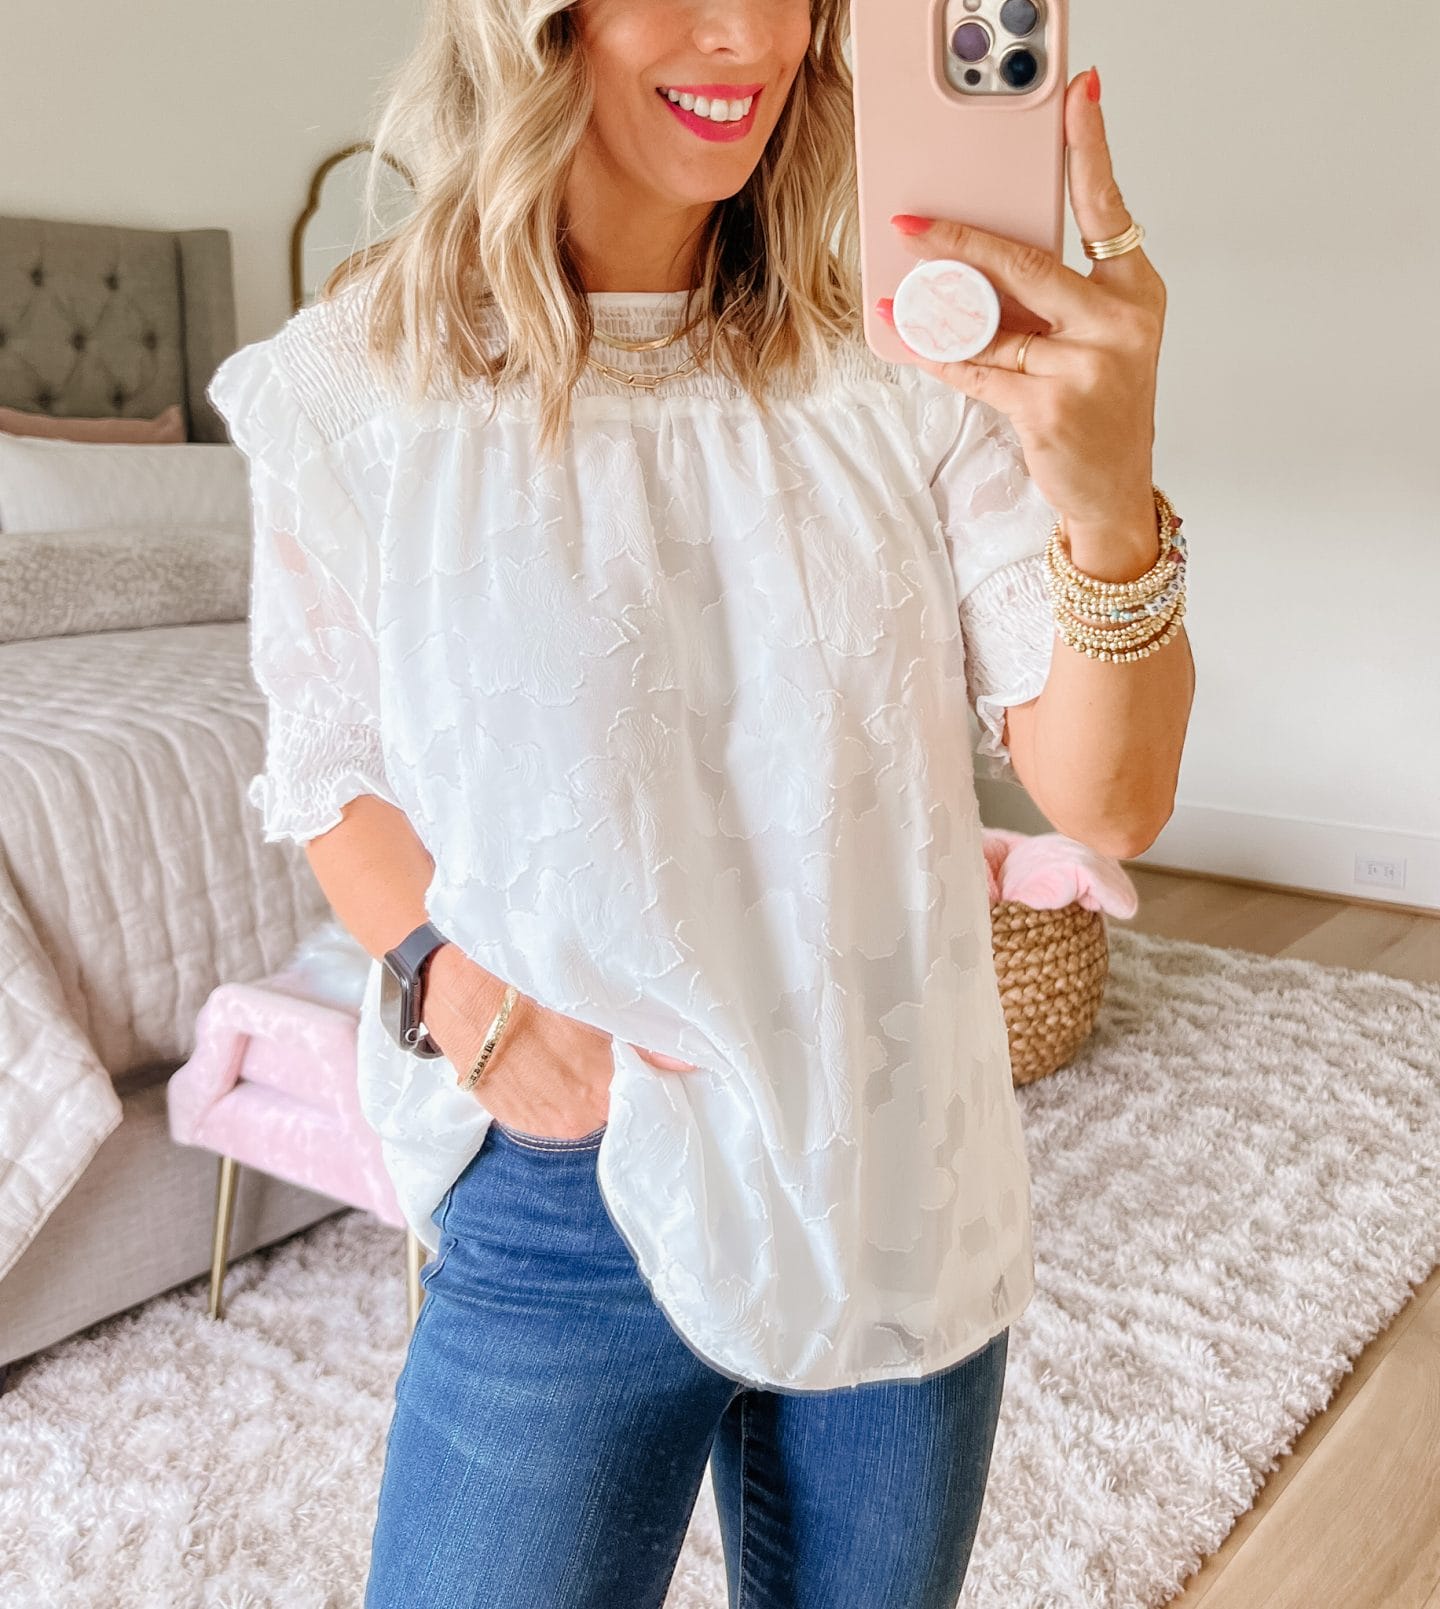 White Lace Shell Top, Jeans, Sandals 